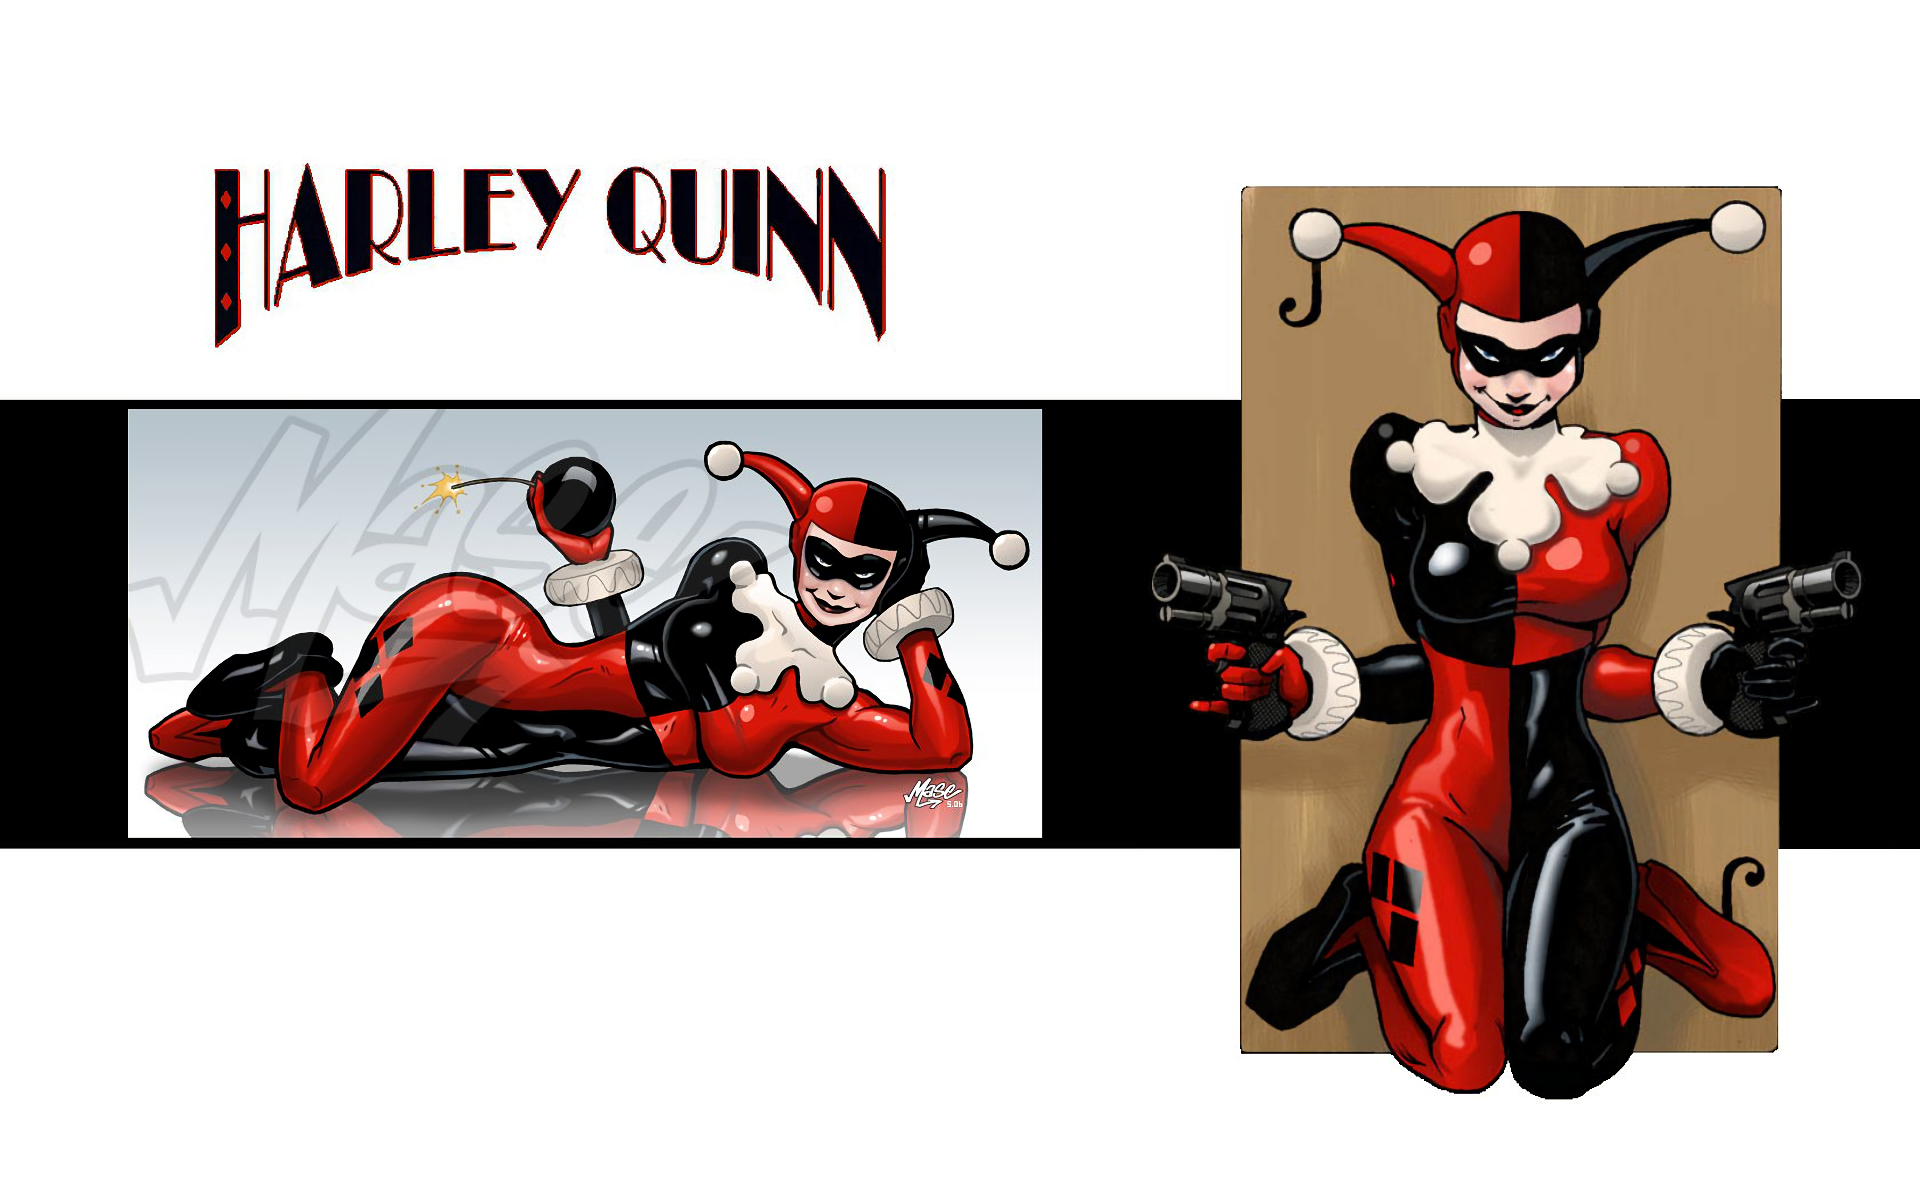 Harley Quinn unleashes her comic book persona in this vibrant desktop wallpaper.